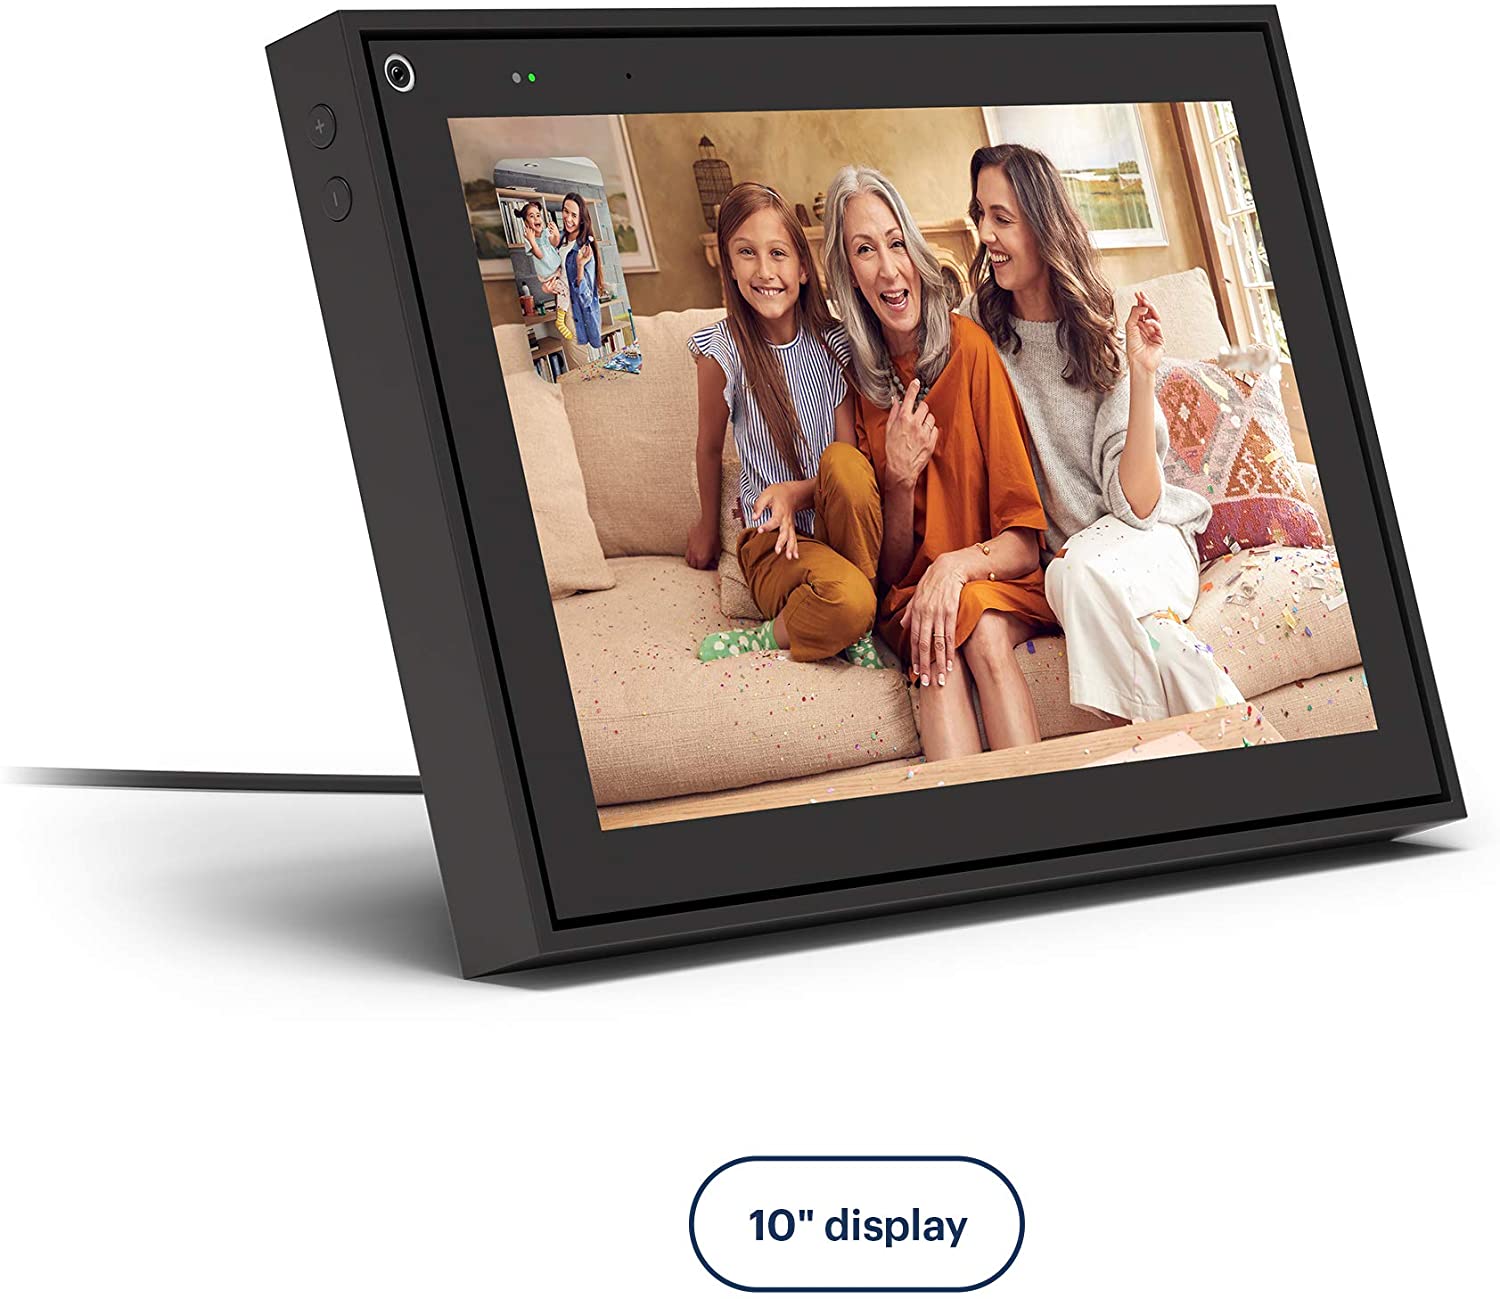 Facebook Portal - Smart Video Calling 10” Touch Screen Display with Alexa 